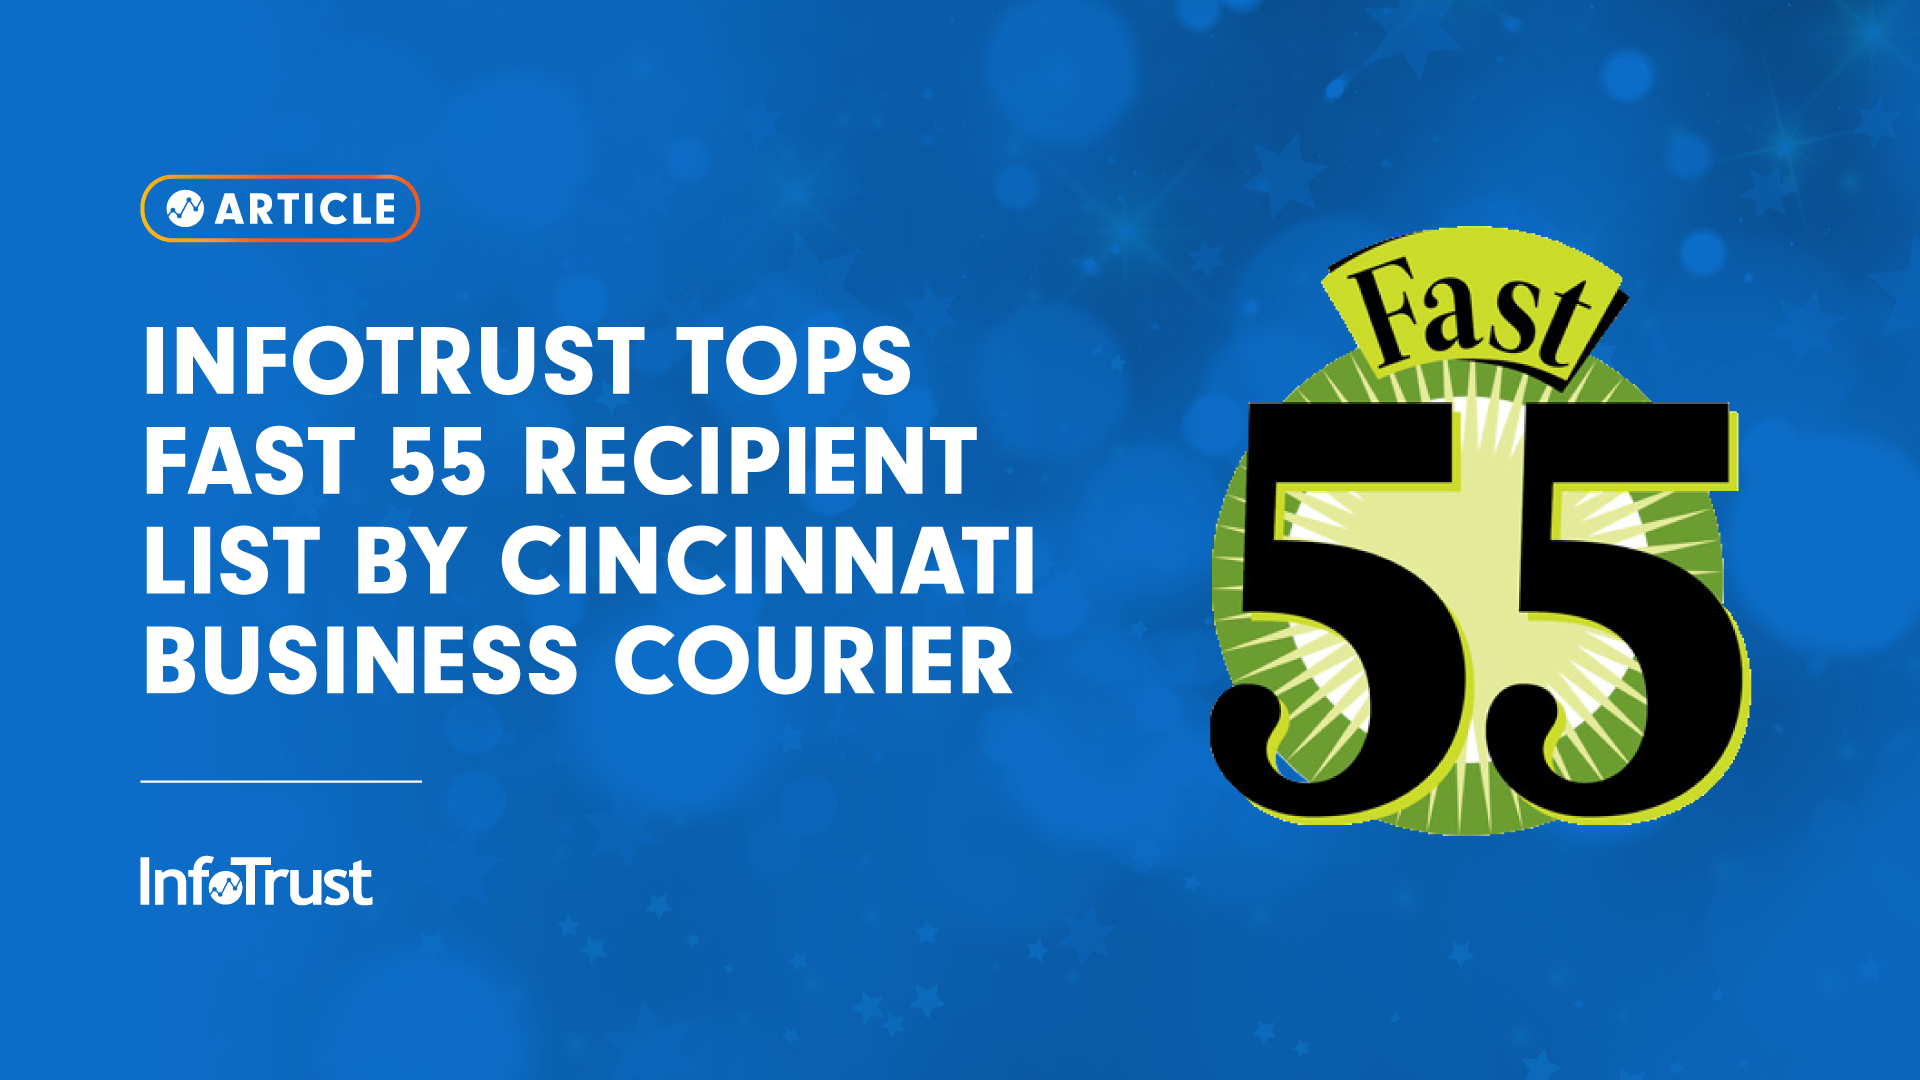 InfoTrust Named to Fast 55 Recipient List by Cincinnati Business Courier